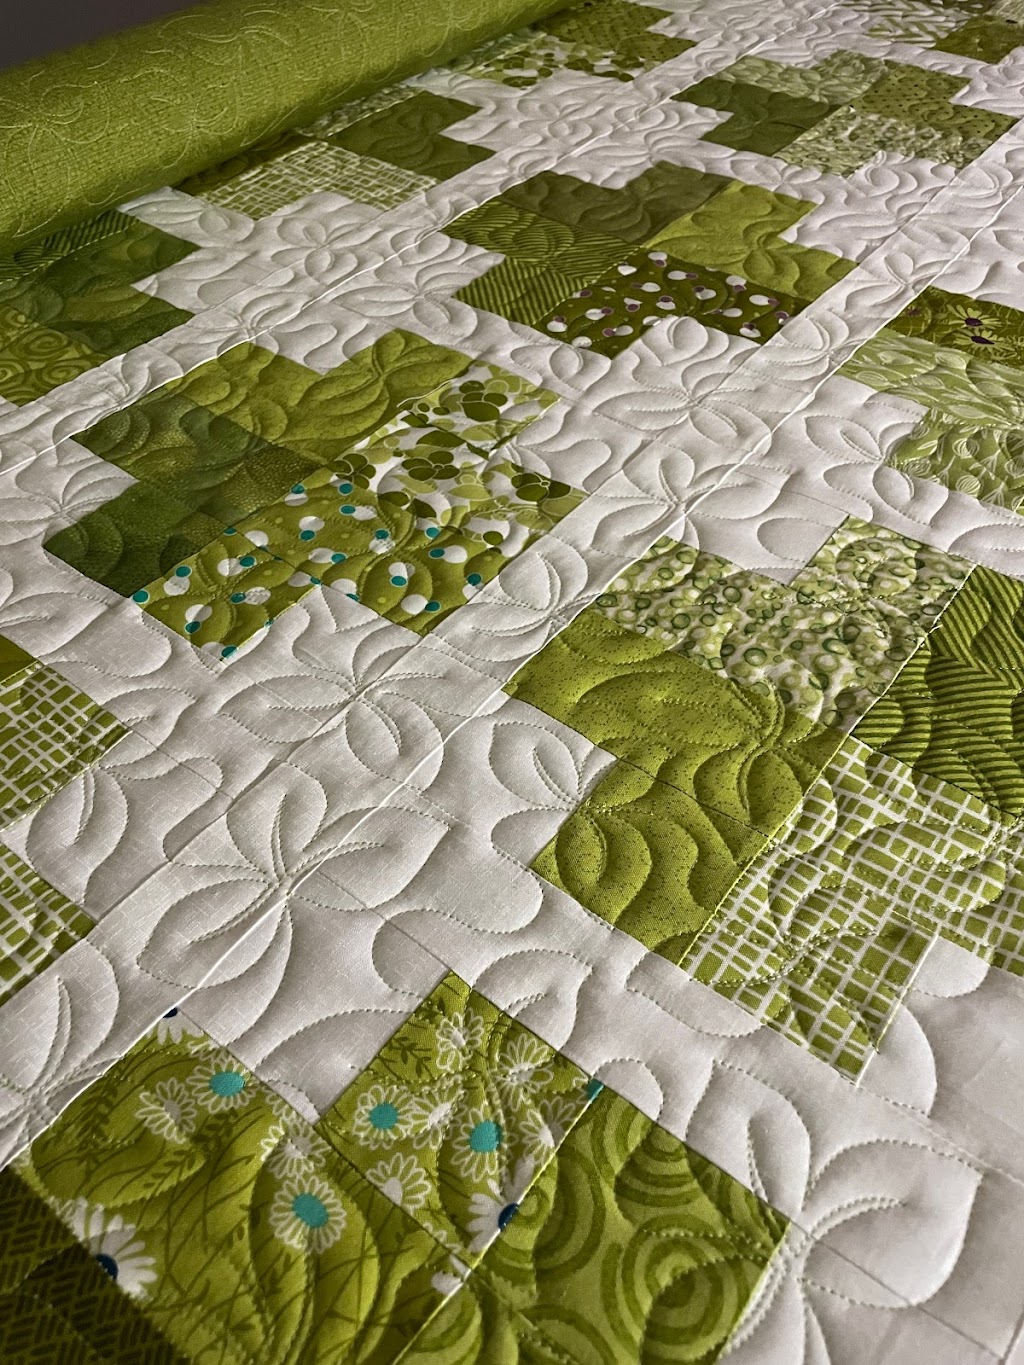 The Finishing Touch Longarm Quilting | 6445 Twin Falls Ct, Moseley, VA 23120 | Phone: (703) 304-9315